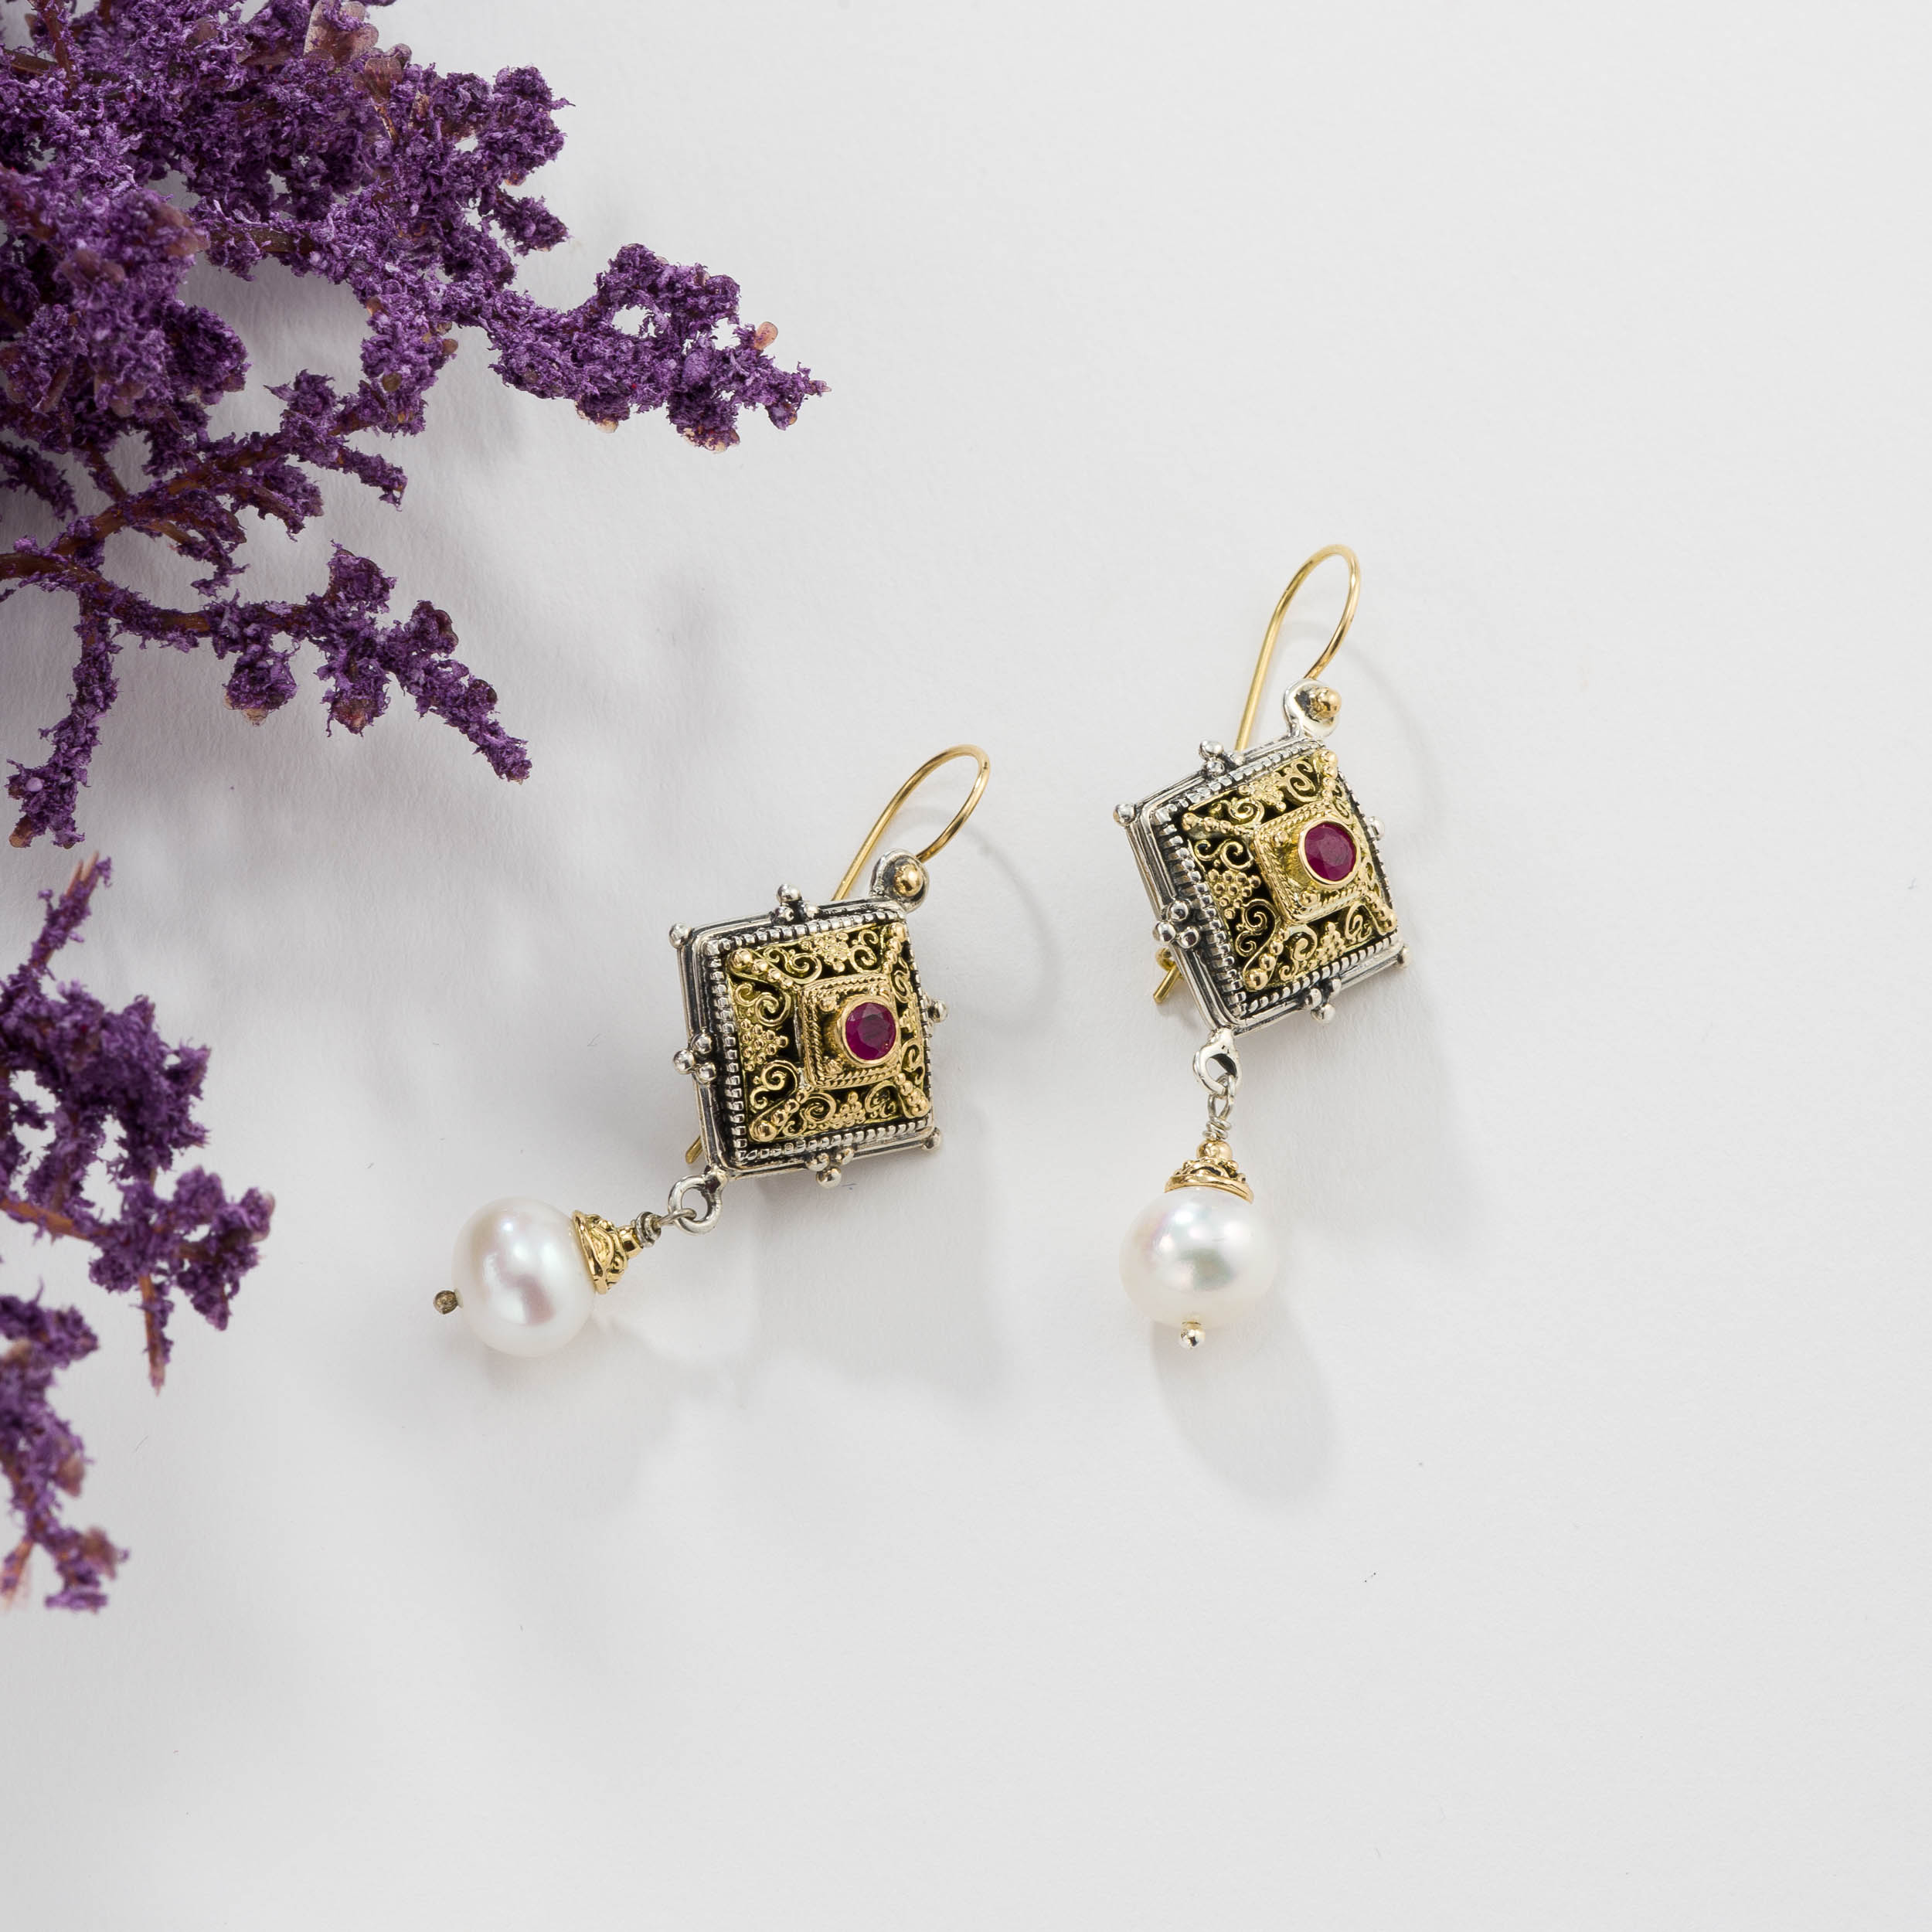 Byzantine long earrings in 18K Gold and sterling silver with ruby